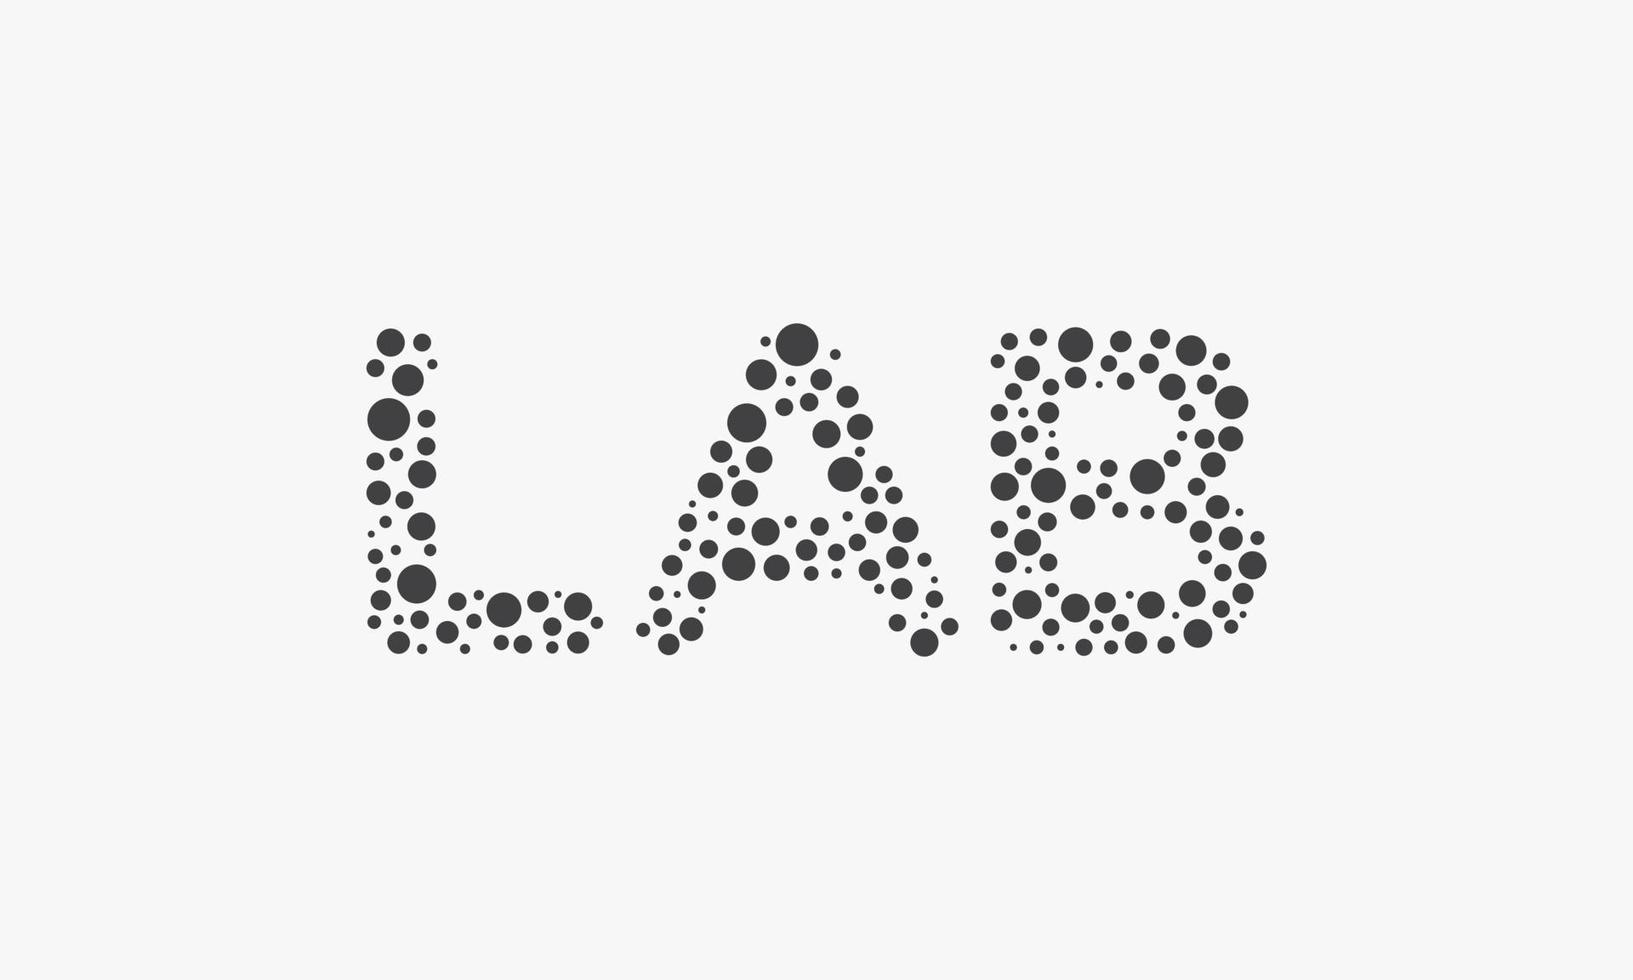 dotted LAB letter logo concept isolated on white background. vector